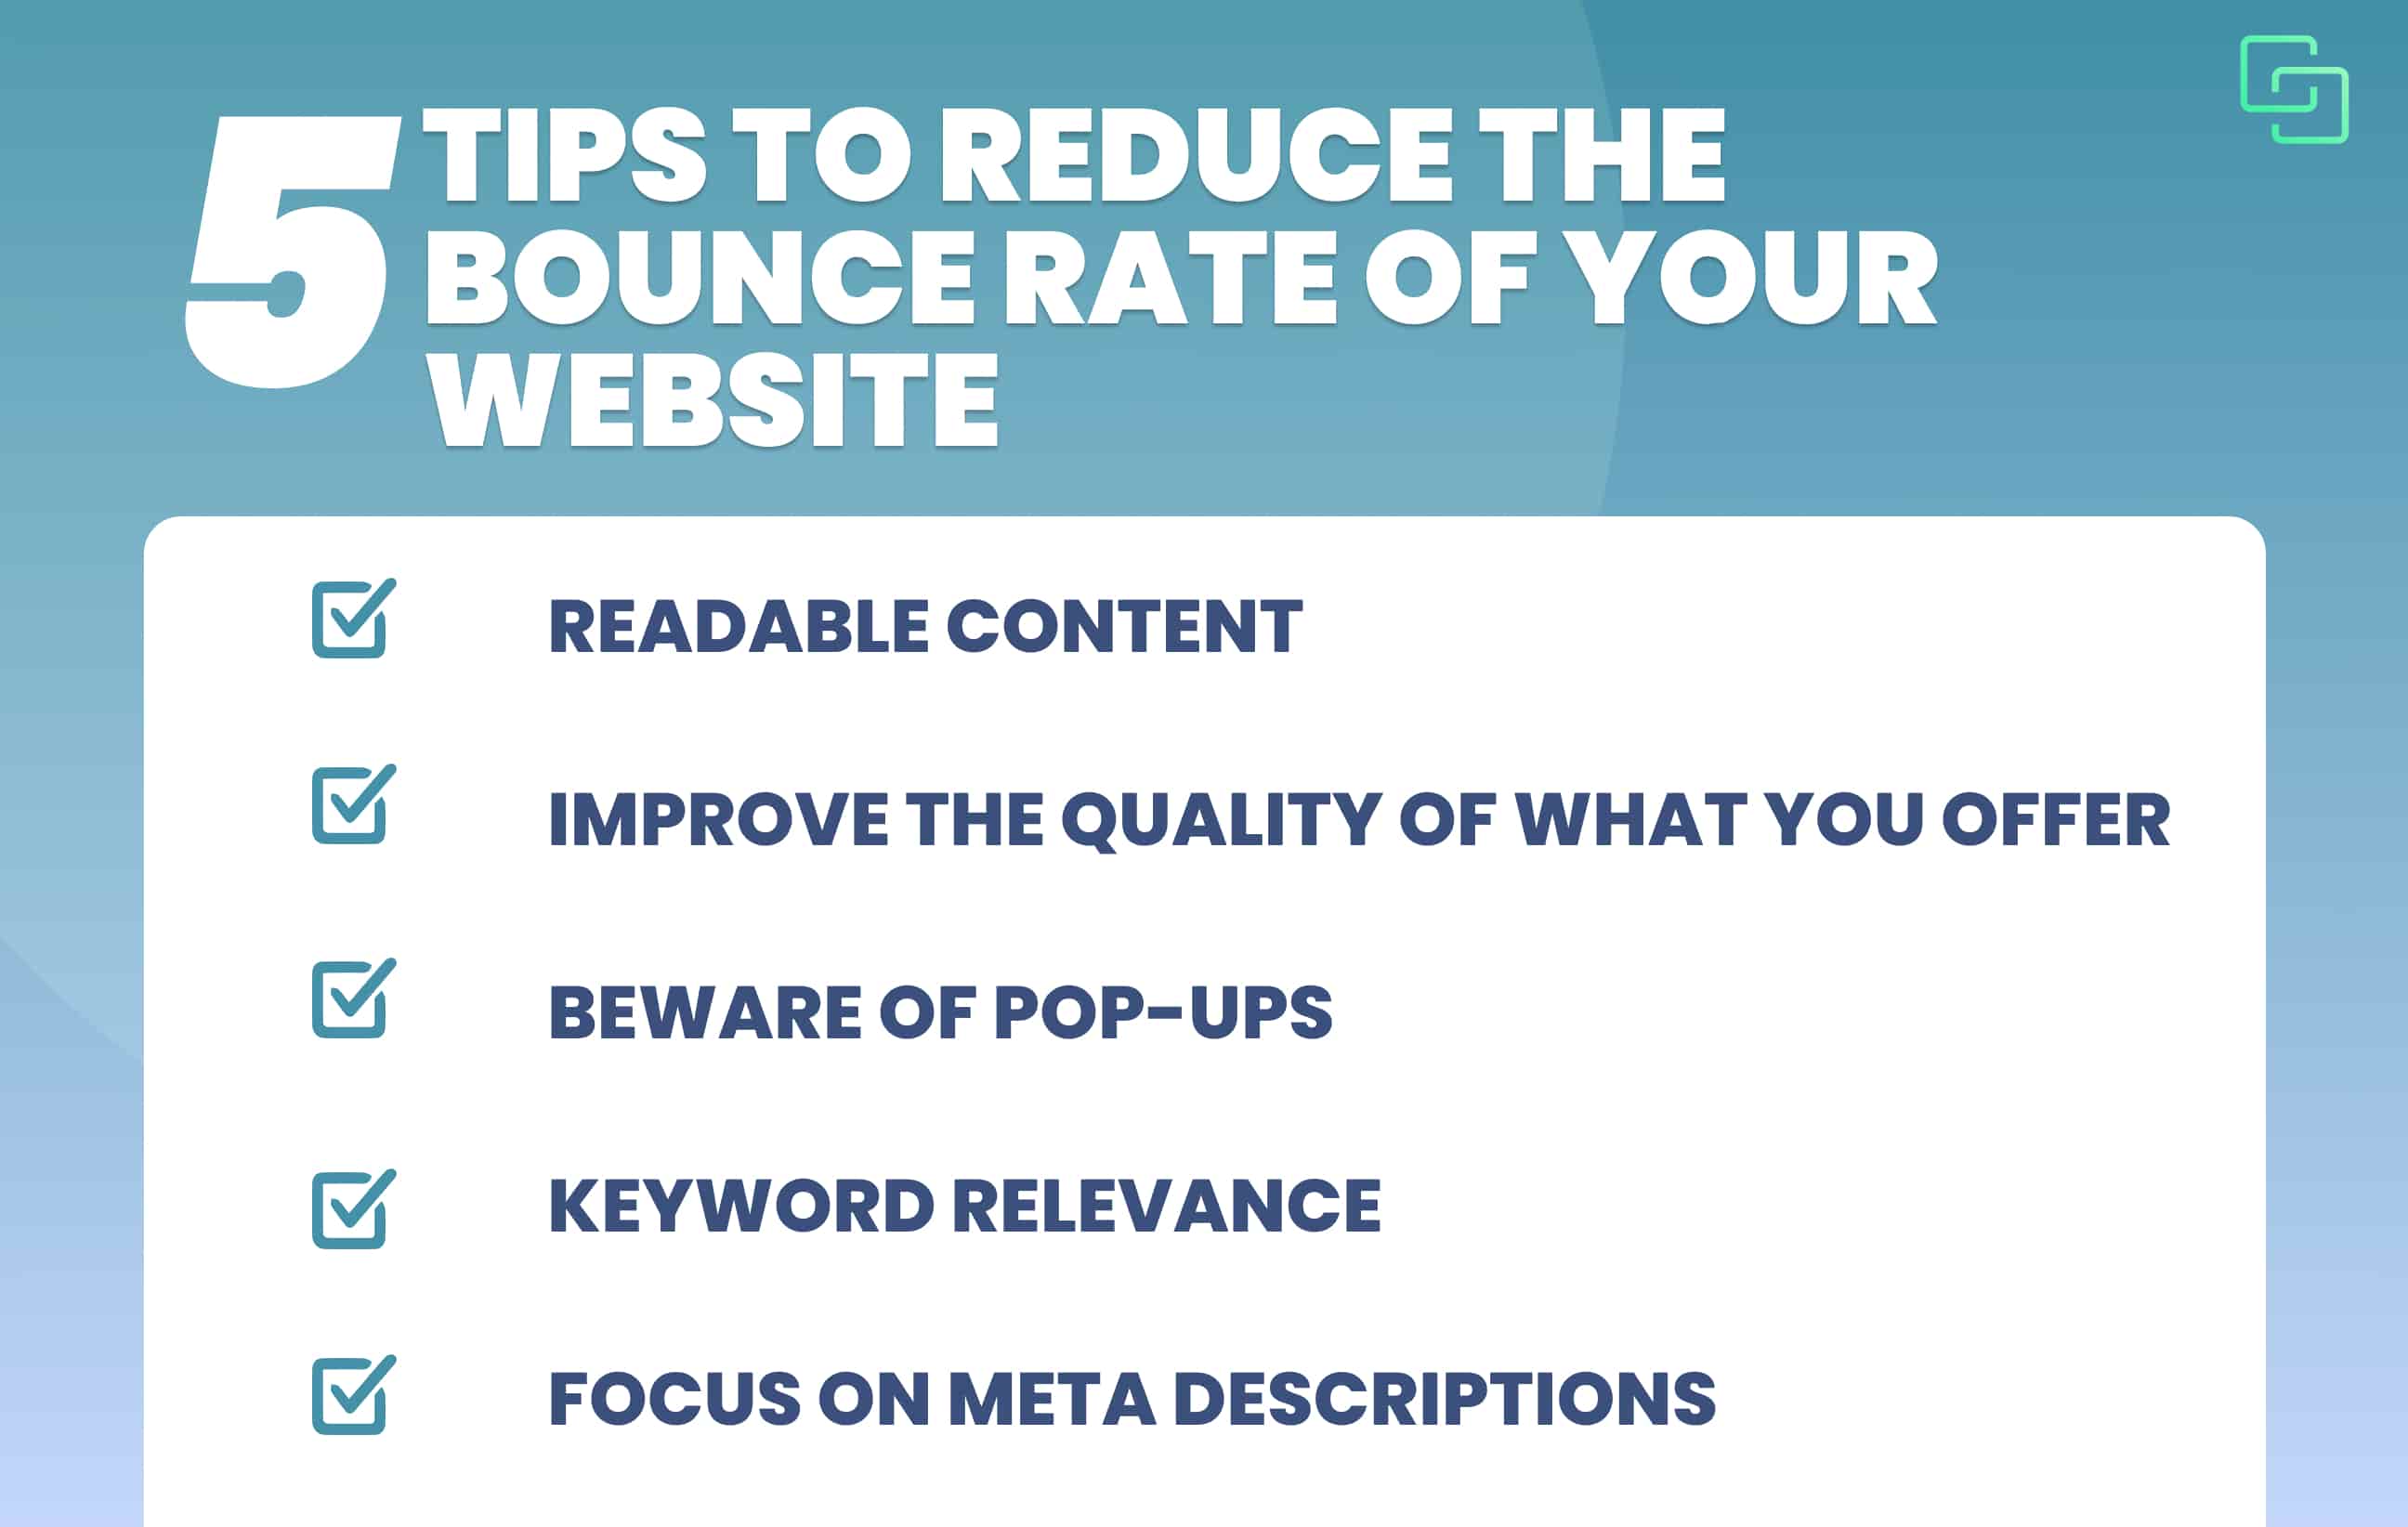 How to Reduce Bounce Rate and Keep Customers on Your Website